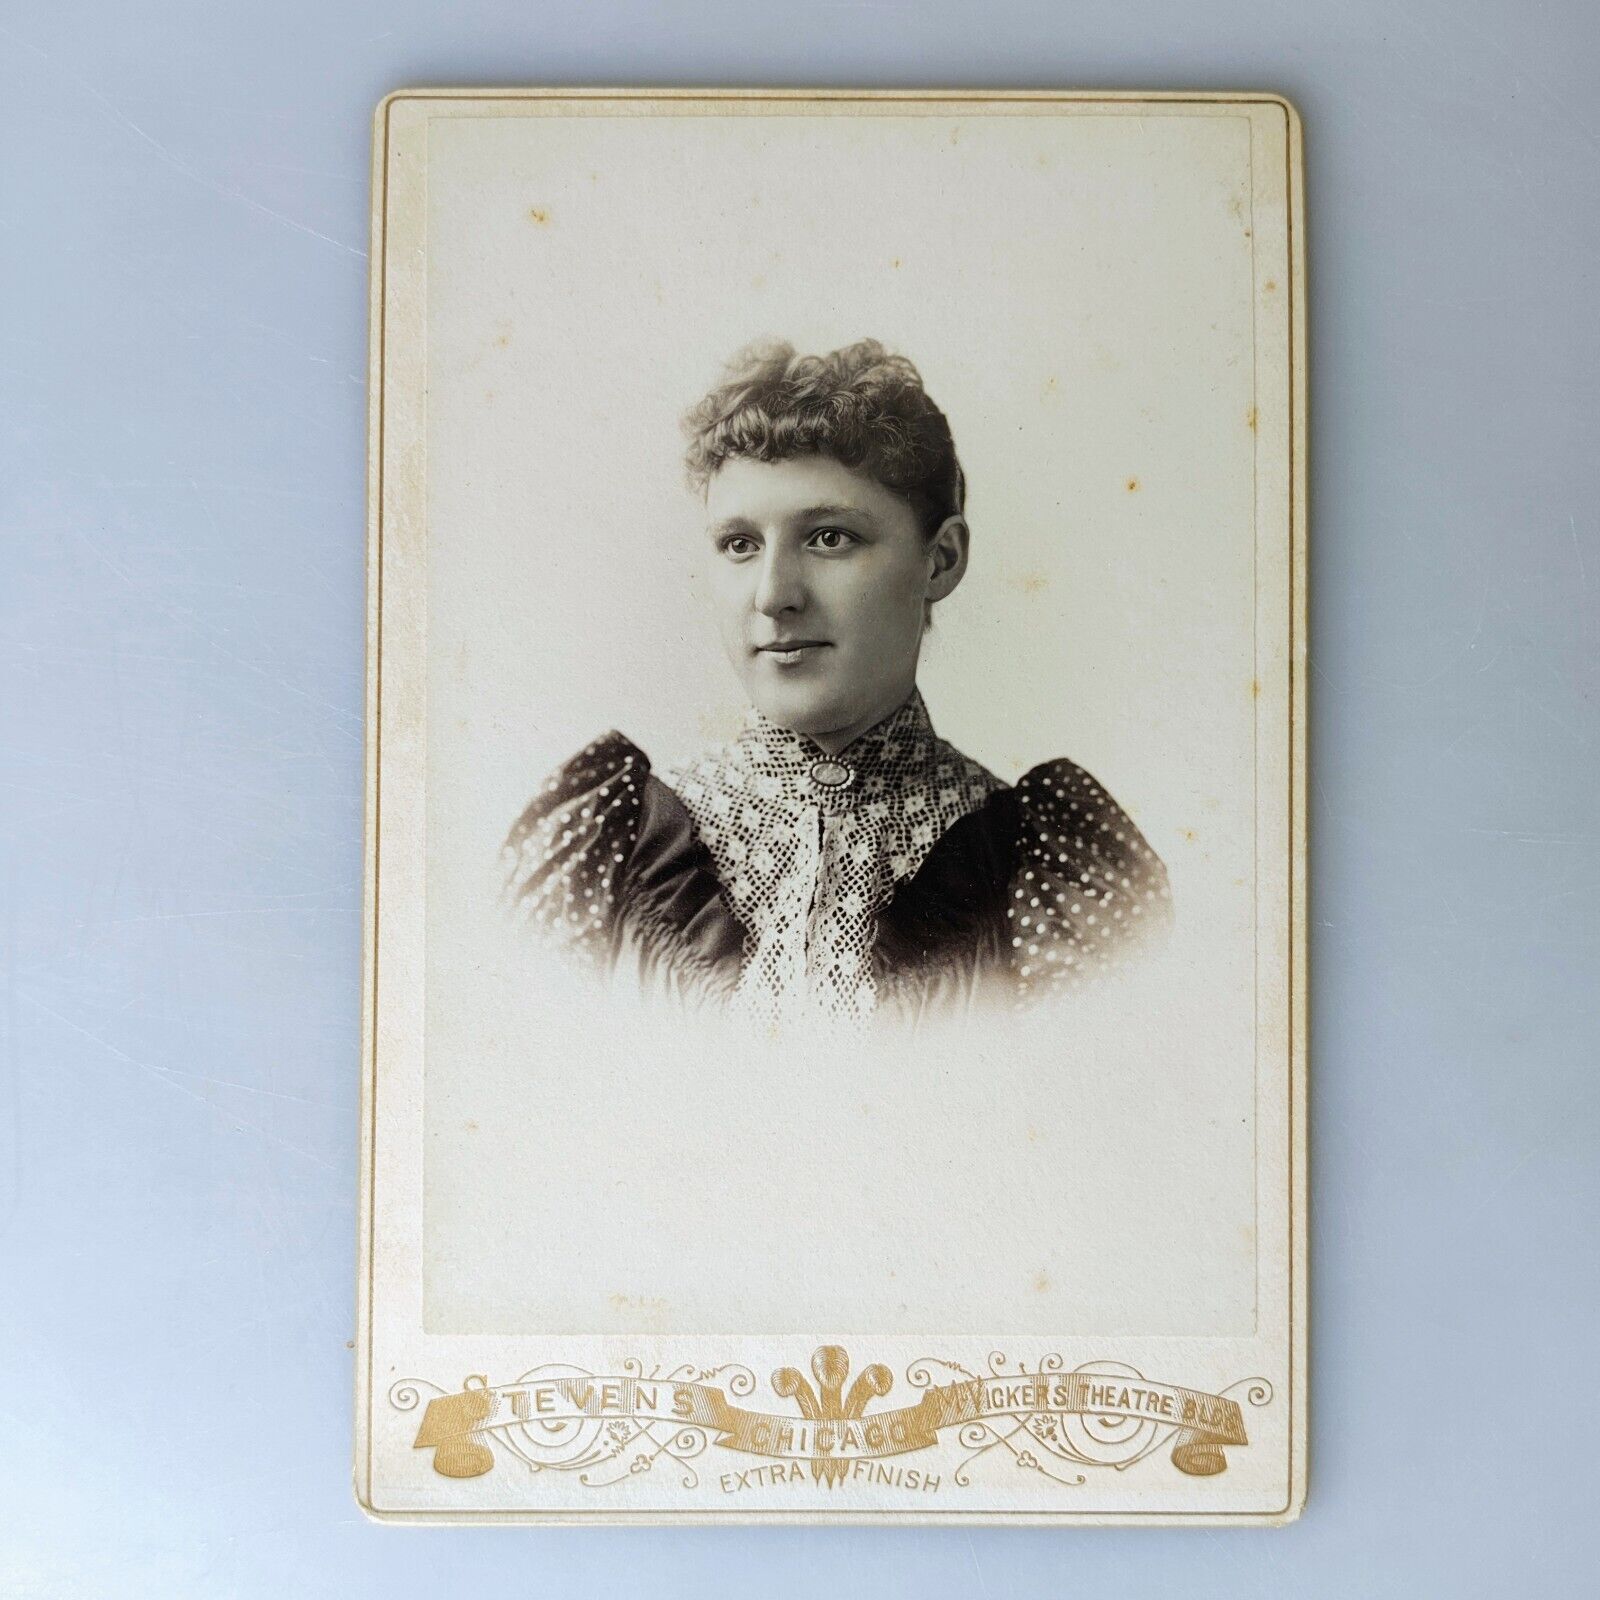 Antique 1890’s Cabinet Card Photo of A Lady In Dress Chicago Vickers Theatre  